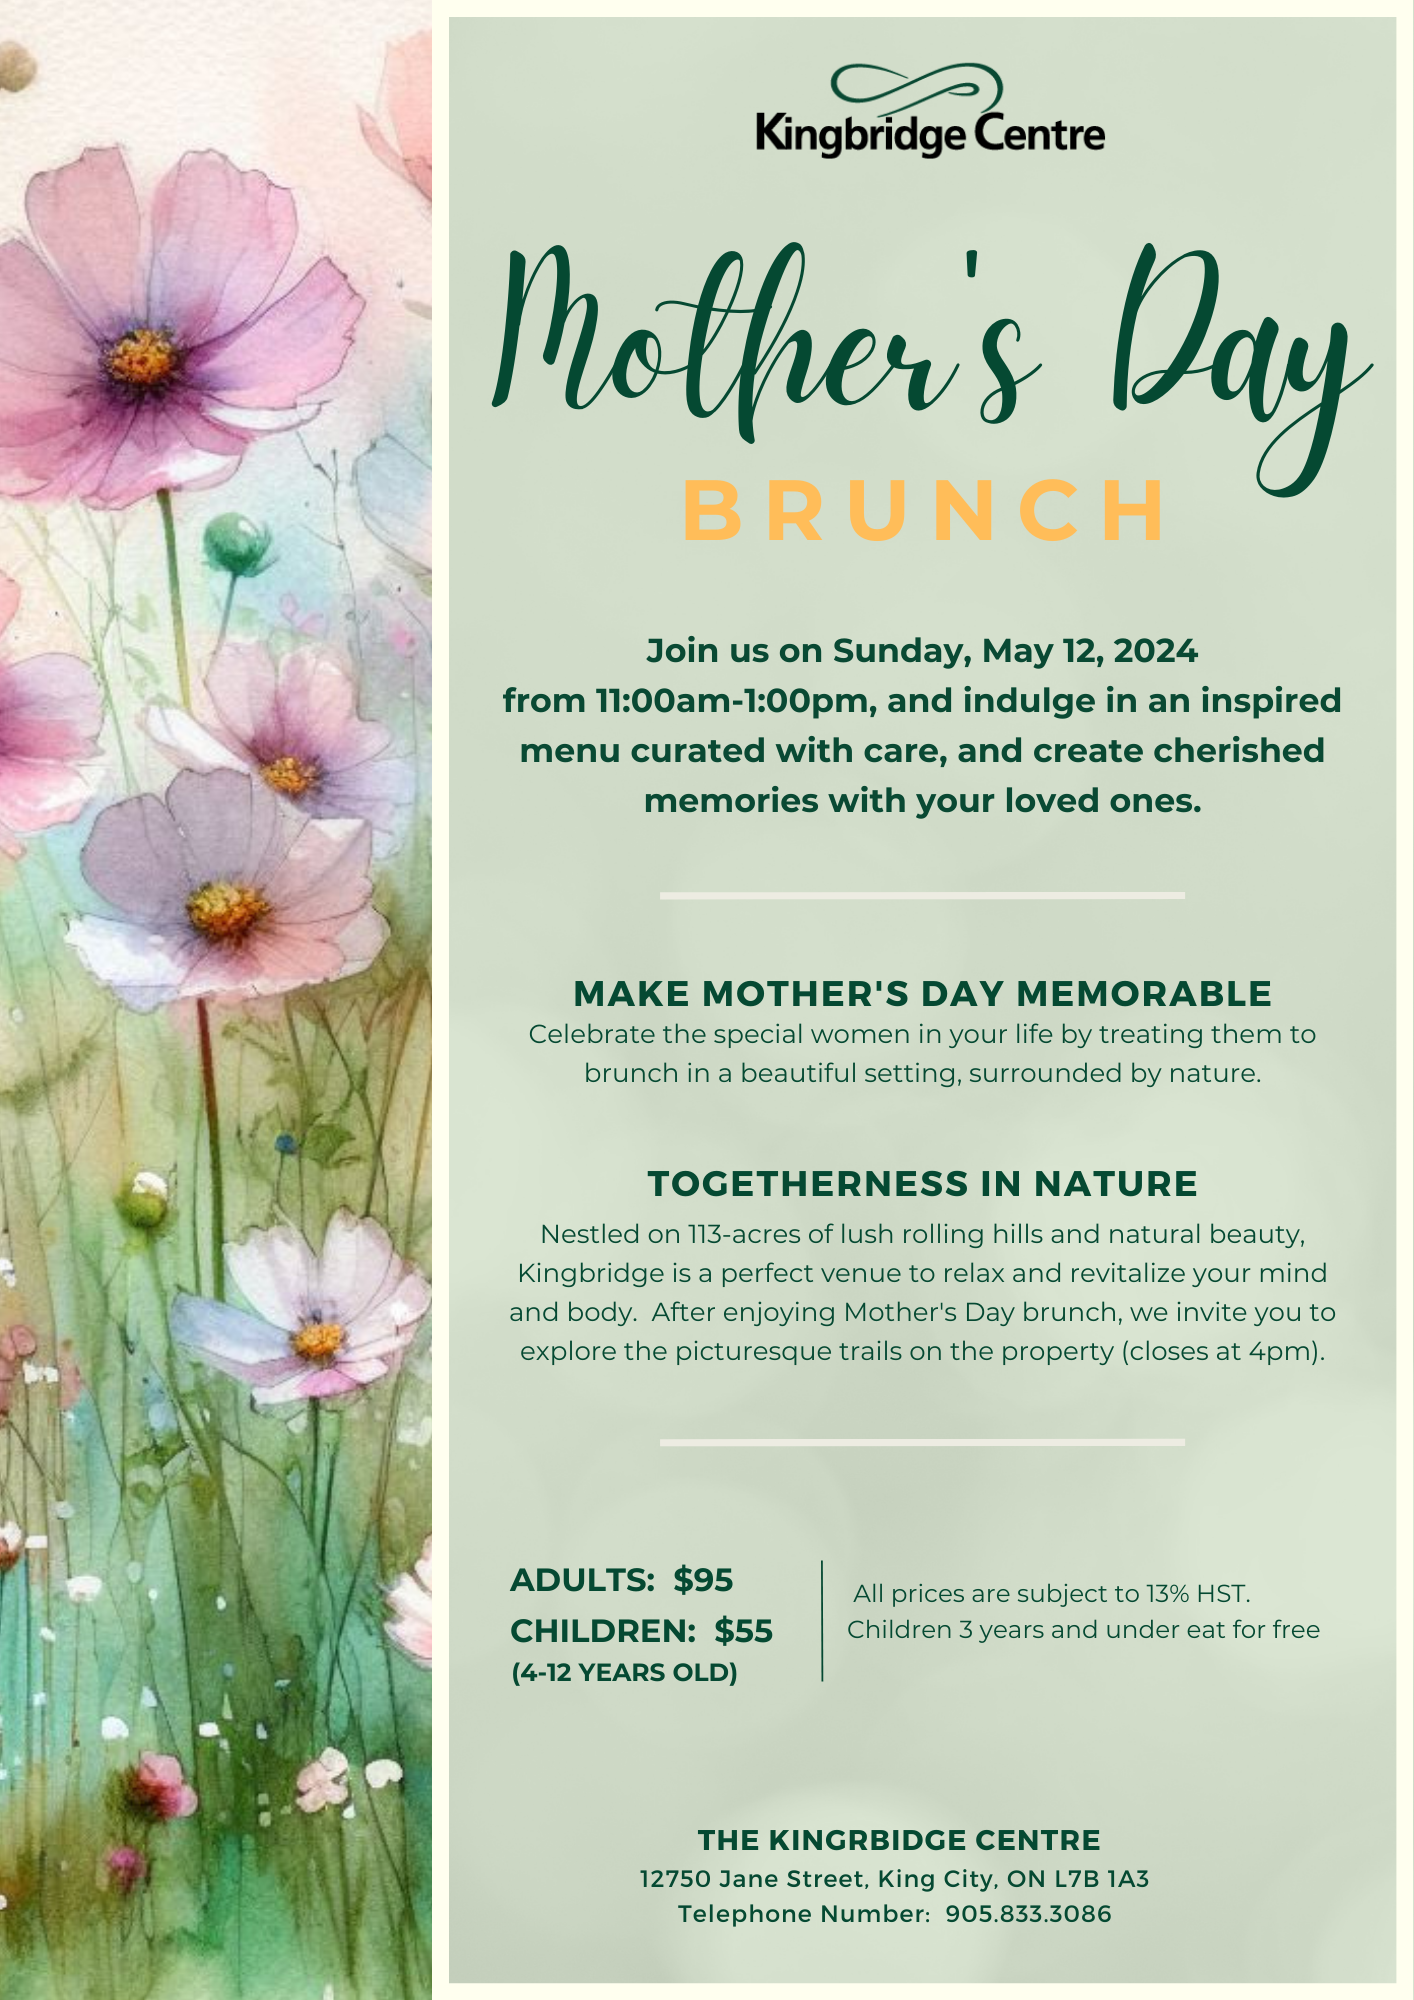 MOTHER'S DAY BRUNCH AT THE KINGBRIDGE CENTRE